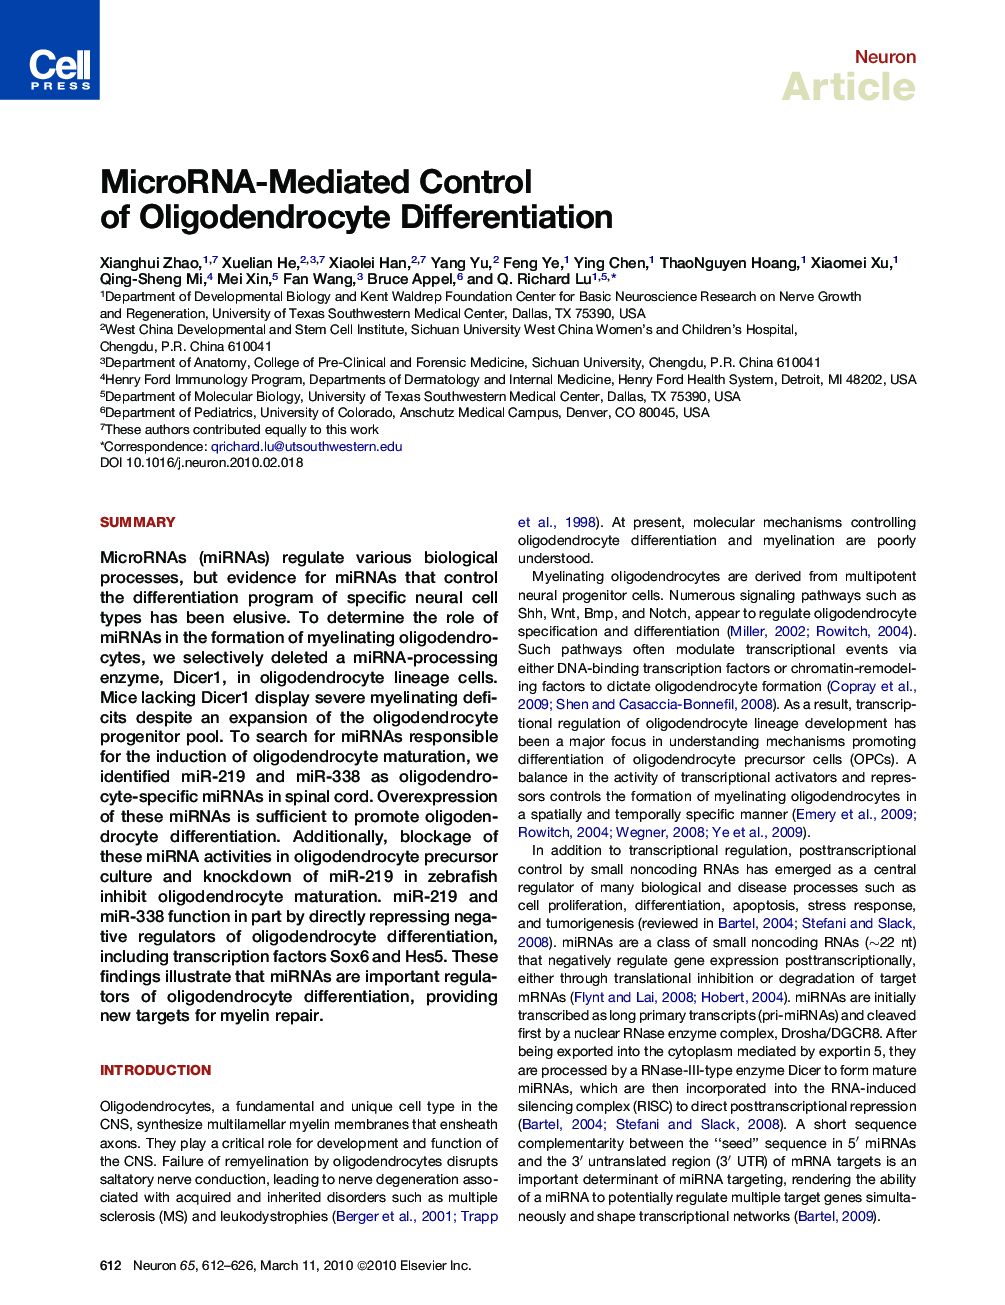 MicroRNA-Mediated Control of Oligodendrocyte Differentiation